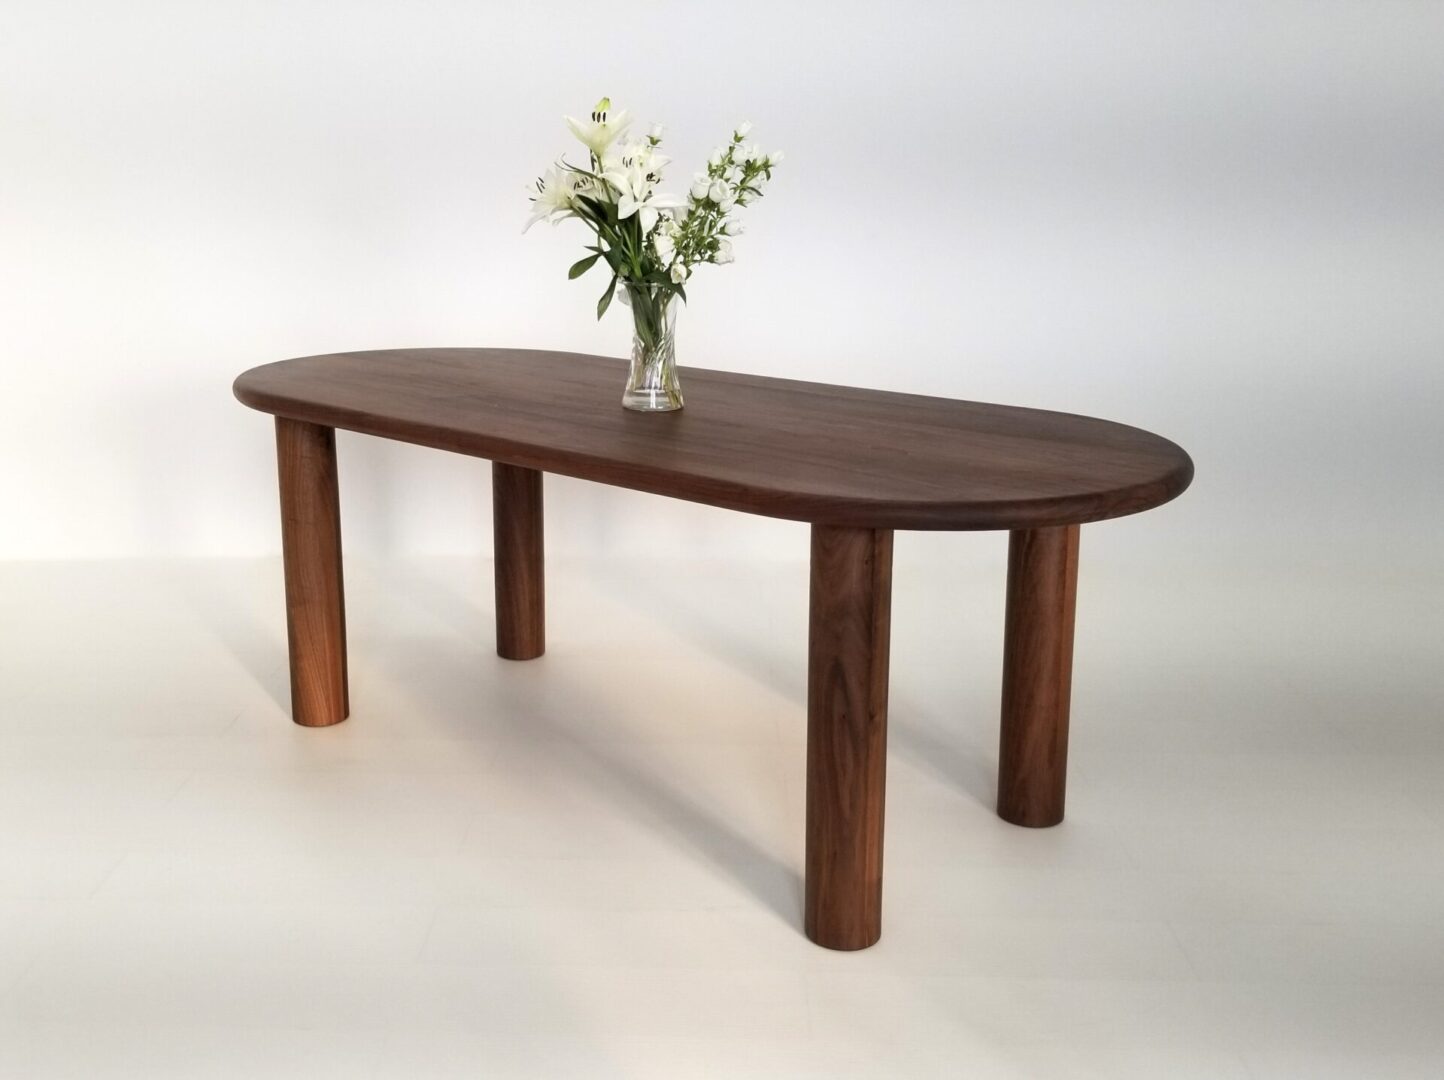 A oval walnut dining table with a vase and flowers on top.